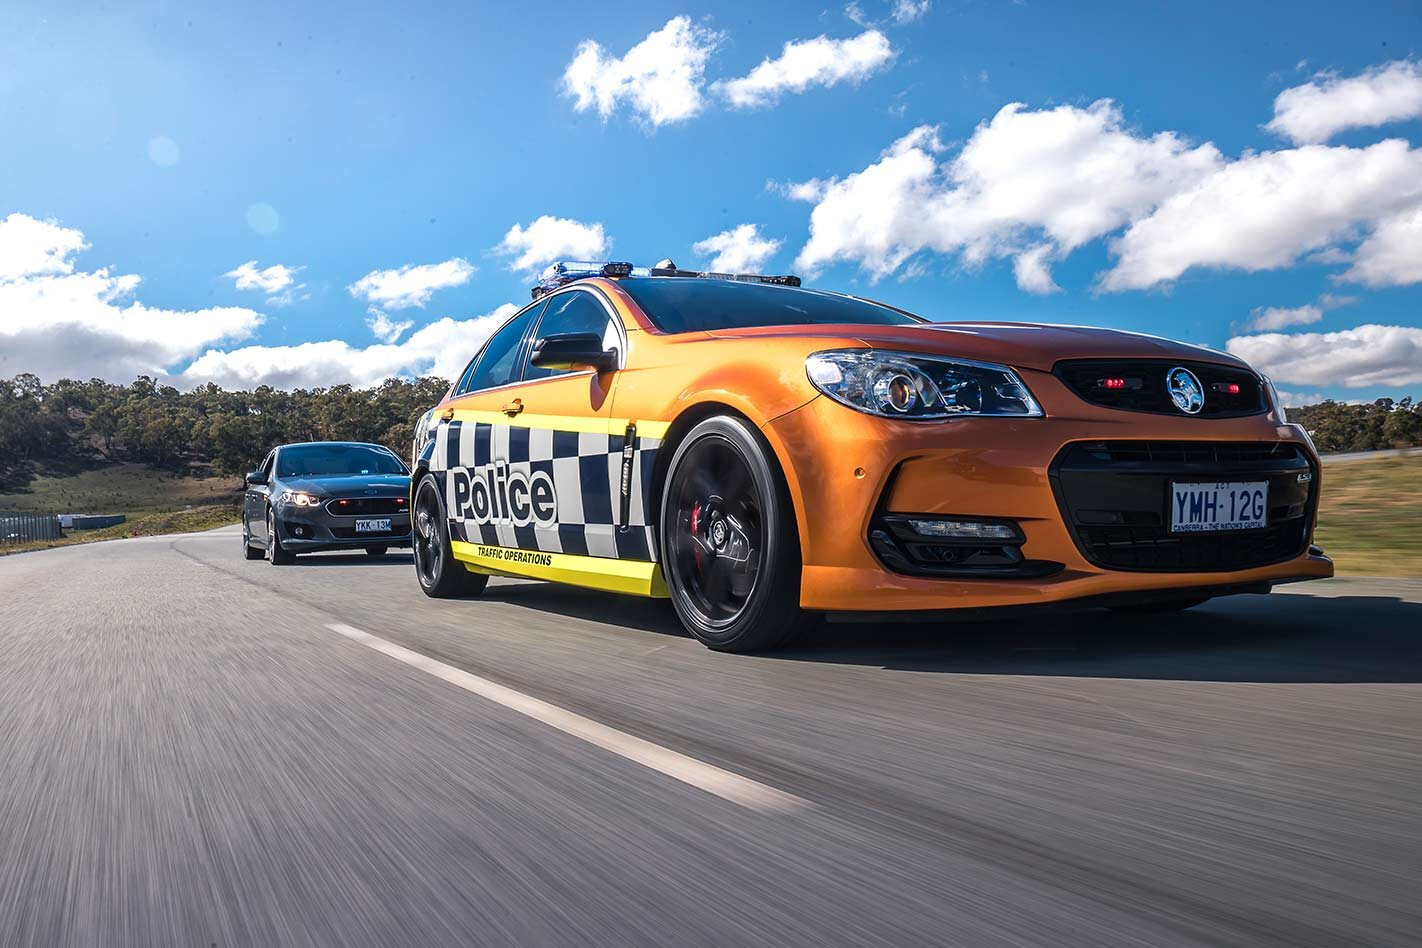 The last of Australian-made Police